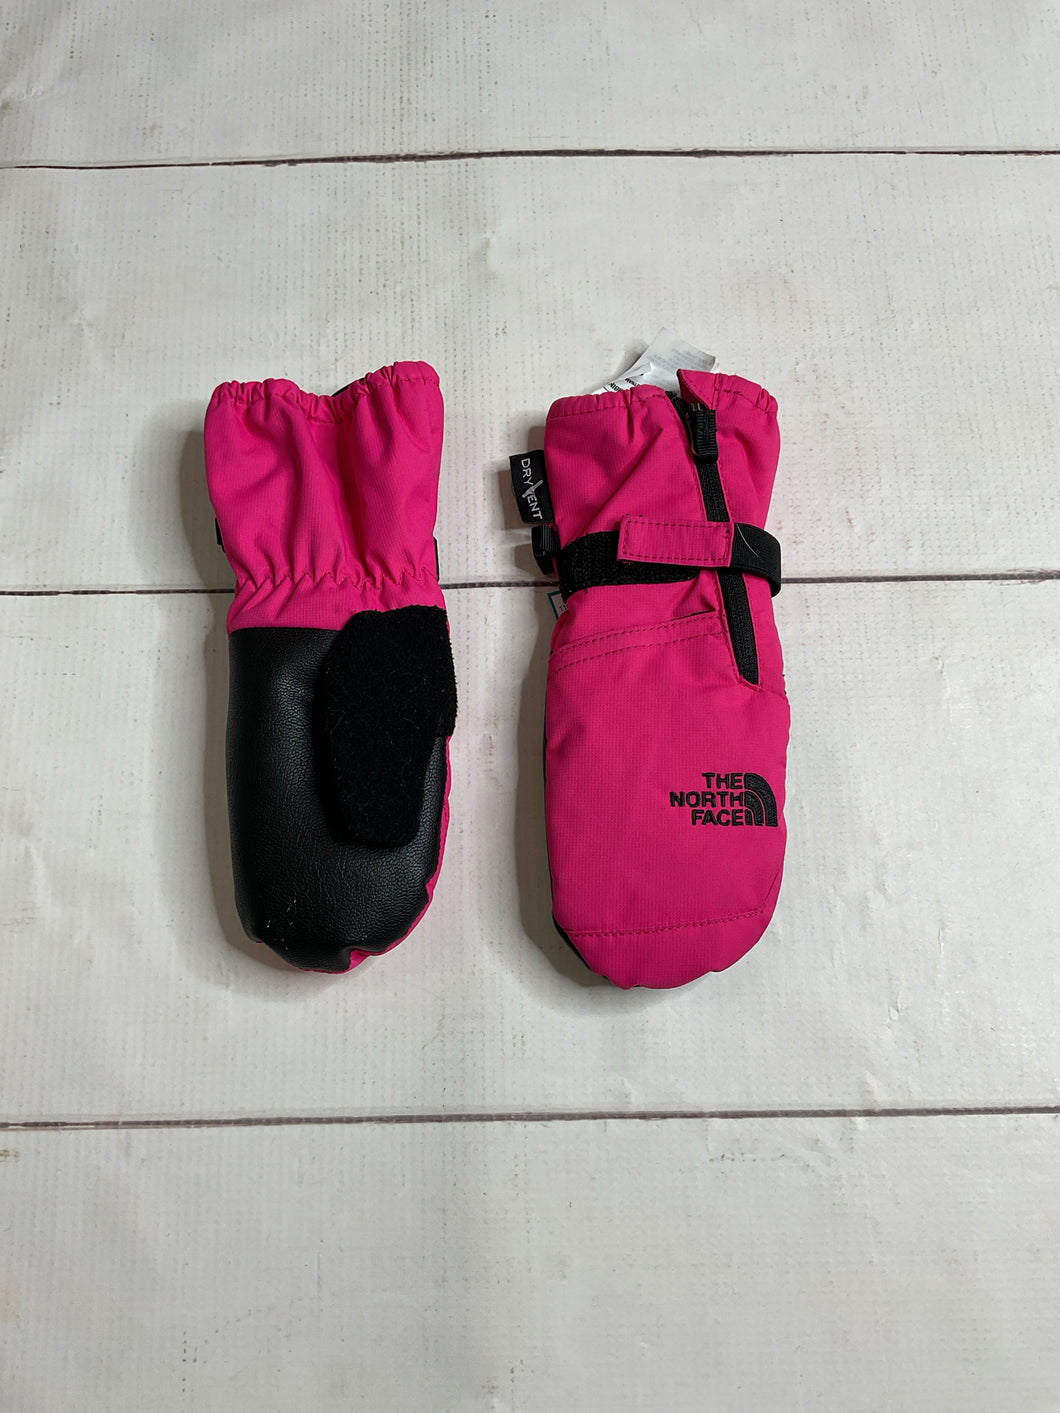 North Face Mittens